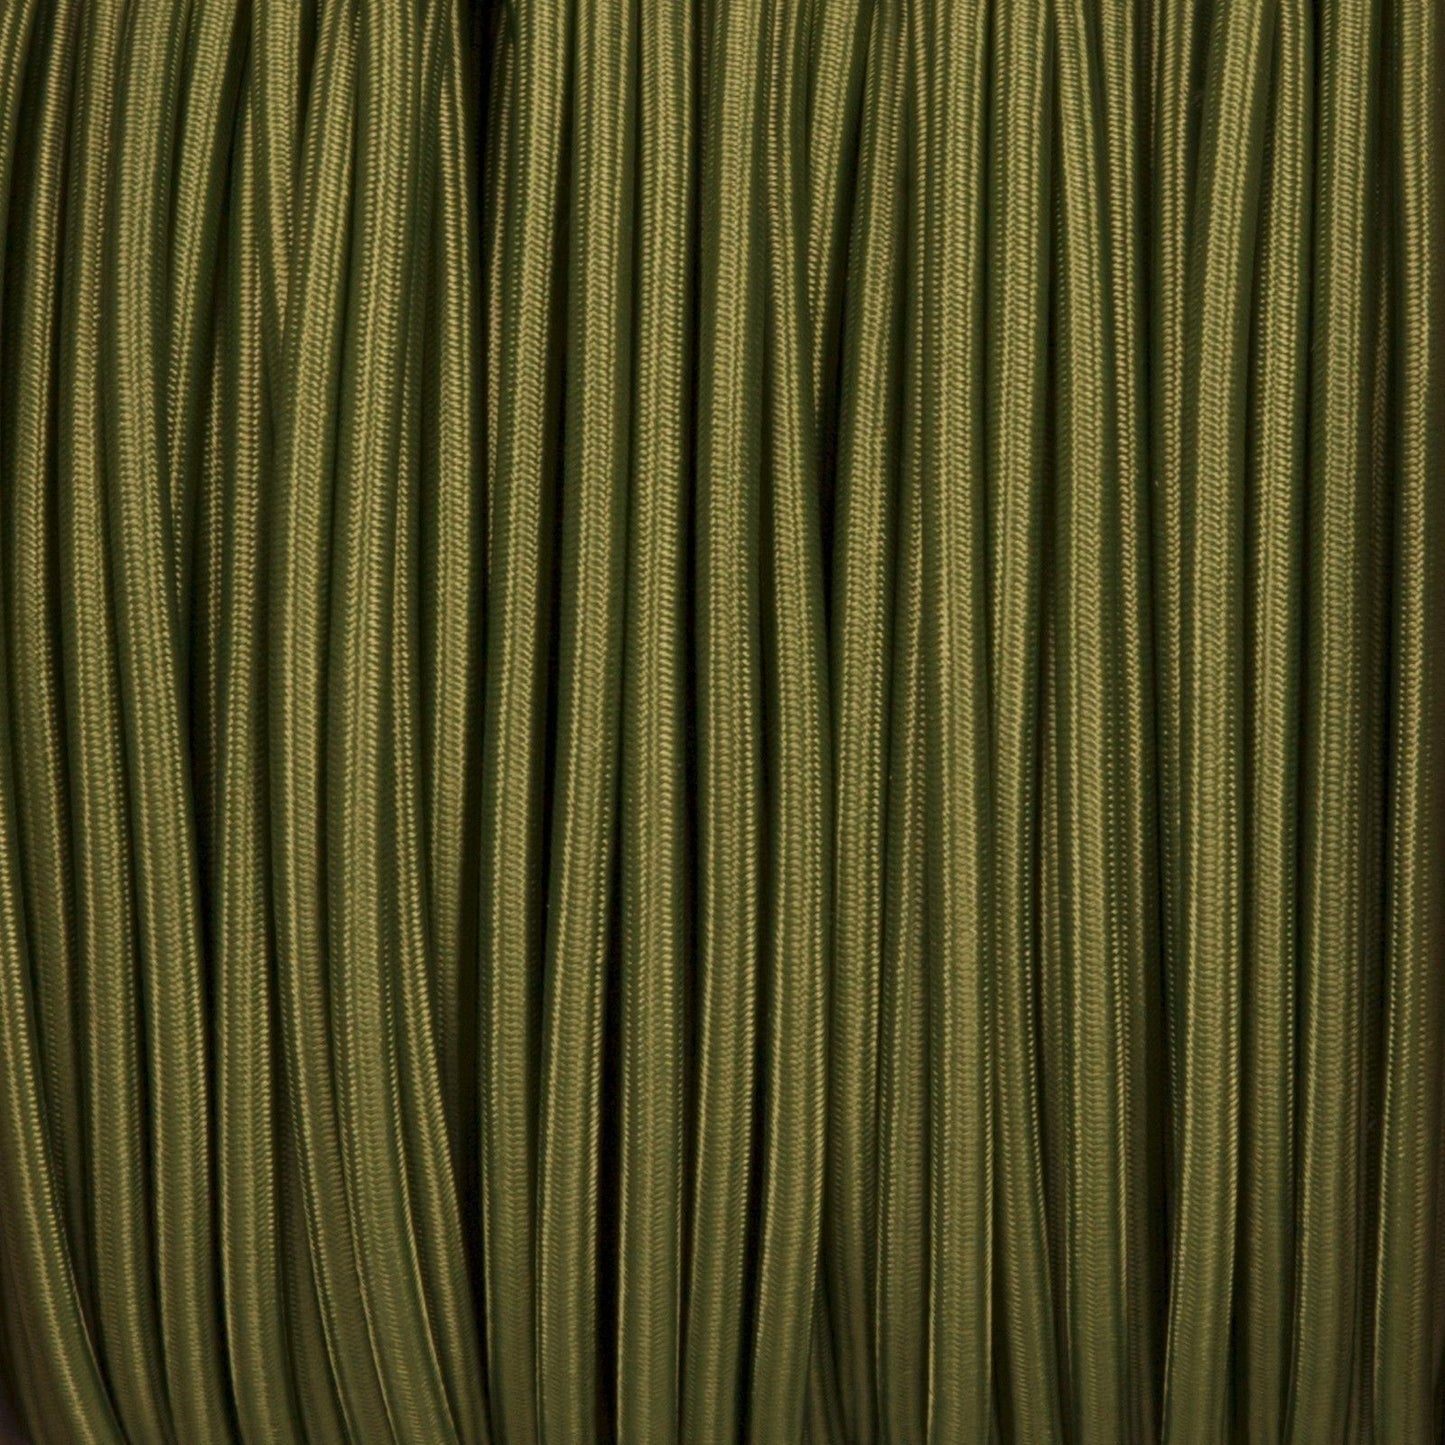 18 Gauge 3 Conductor Round Cloth Covered Wire Braided Light Cord Army Green